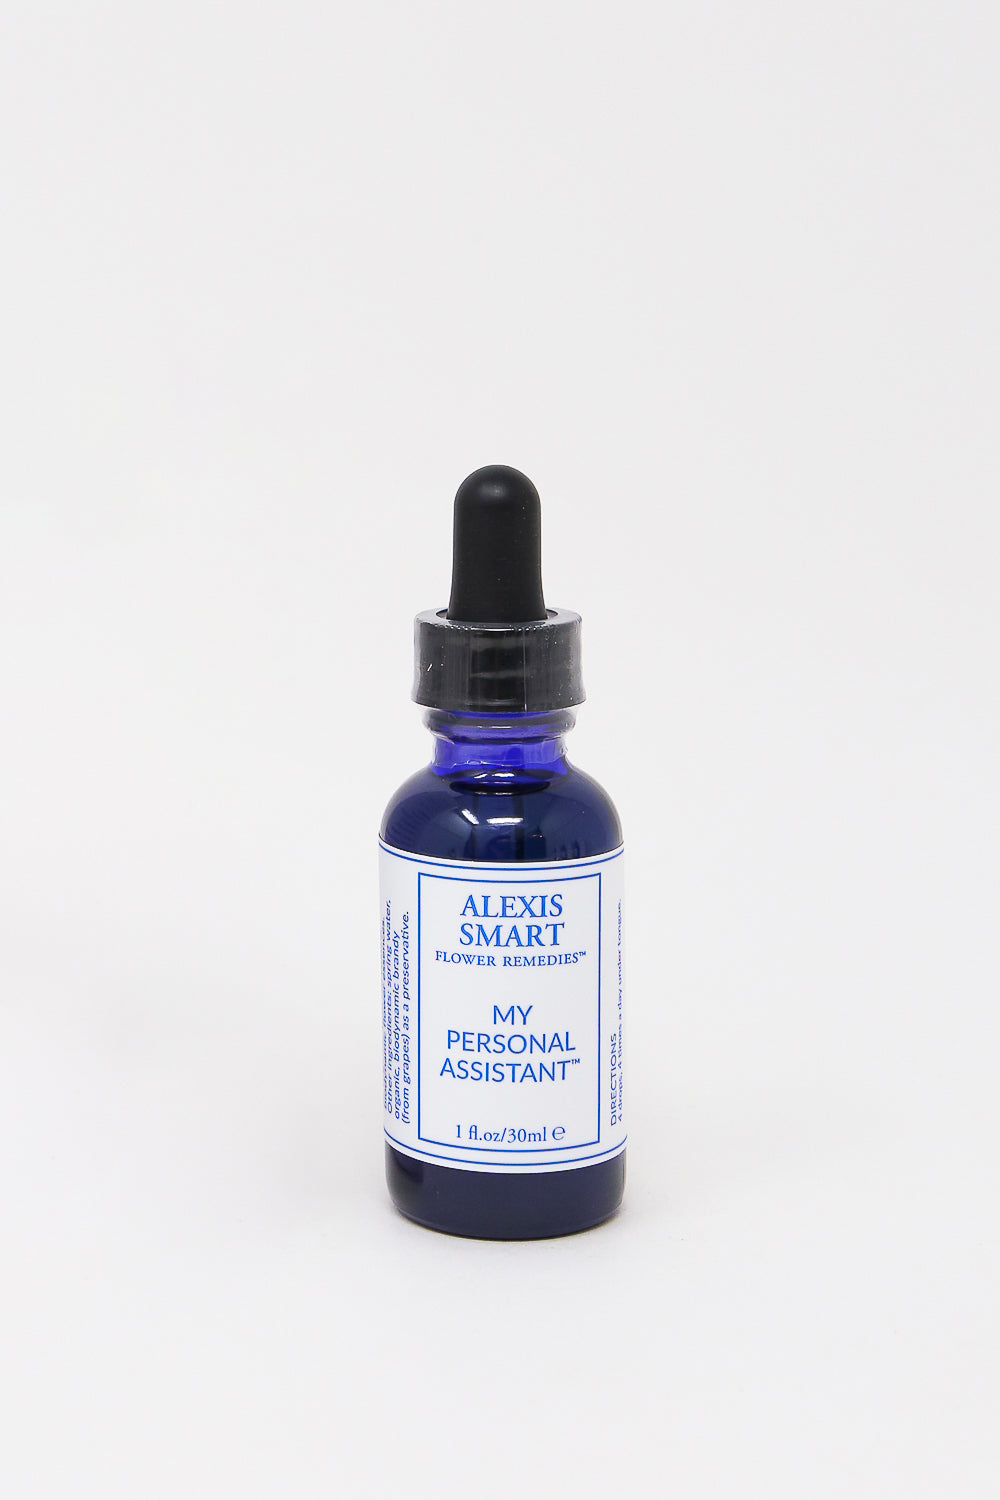 Alexis Smart - Flower Remedies - My Personal Assistant